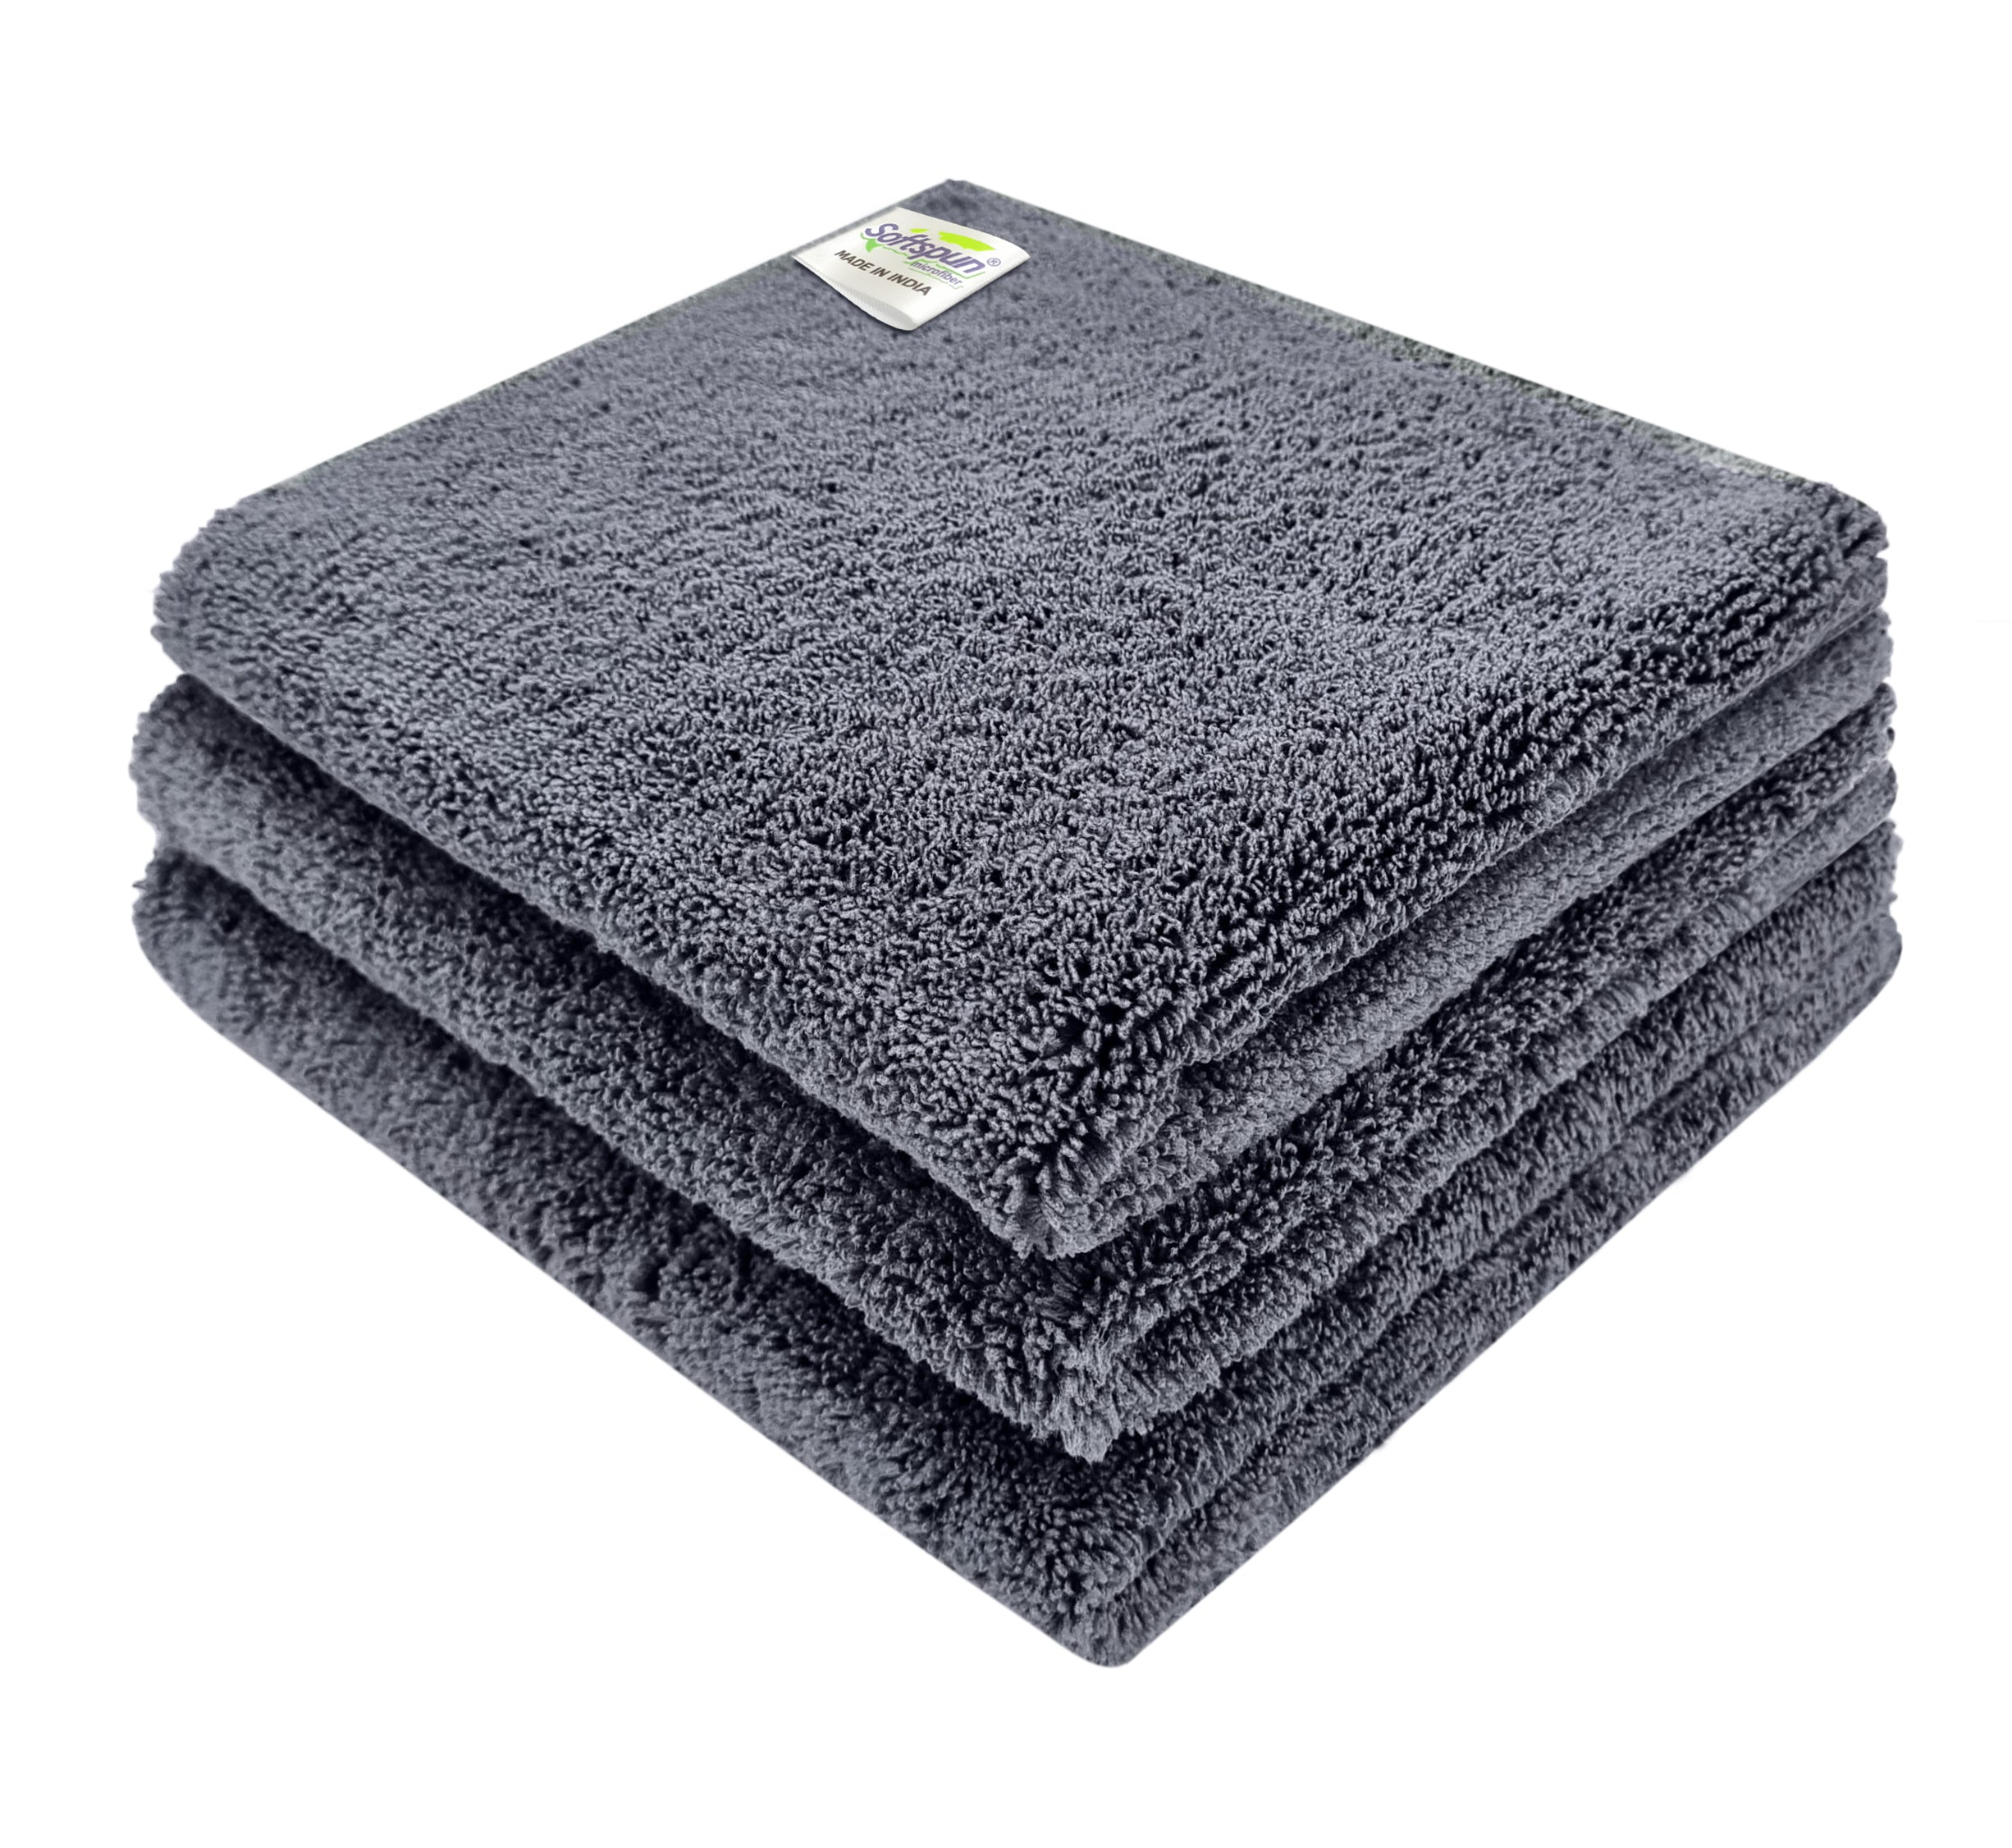 SOFTSPUN Microfiber High Loop Cleaning Cloths, 40x40 cms  pcs Towel Set 380 GSM  Highly Absorbent, Lint and Streak Free, Multi-Purpose Wash Cloth for Kitchen, Window, Silverware.